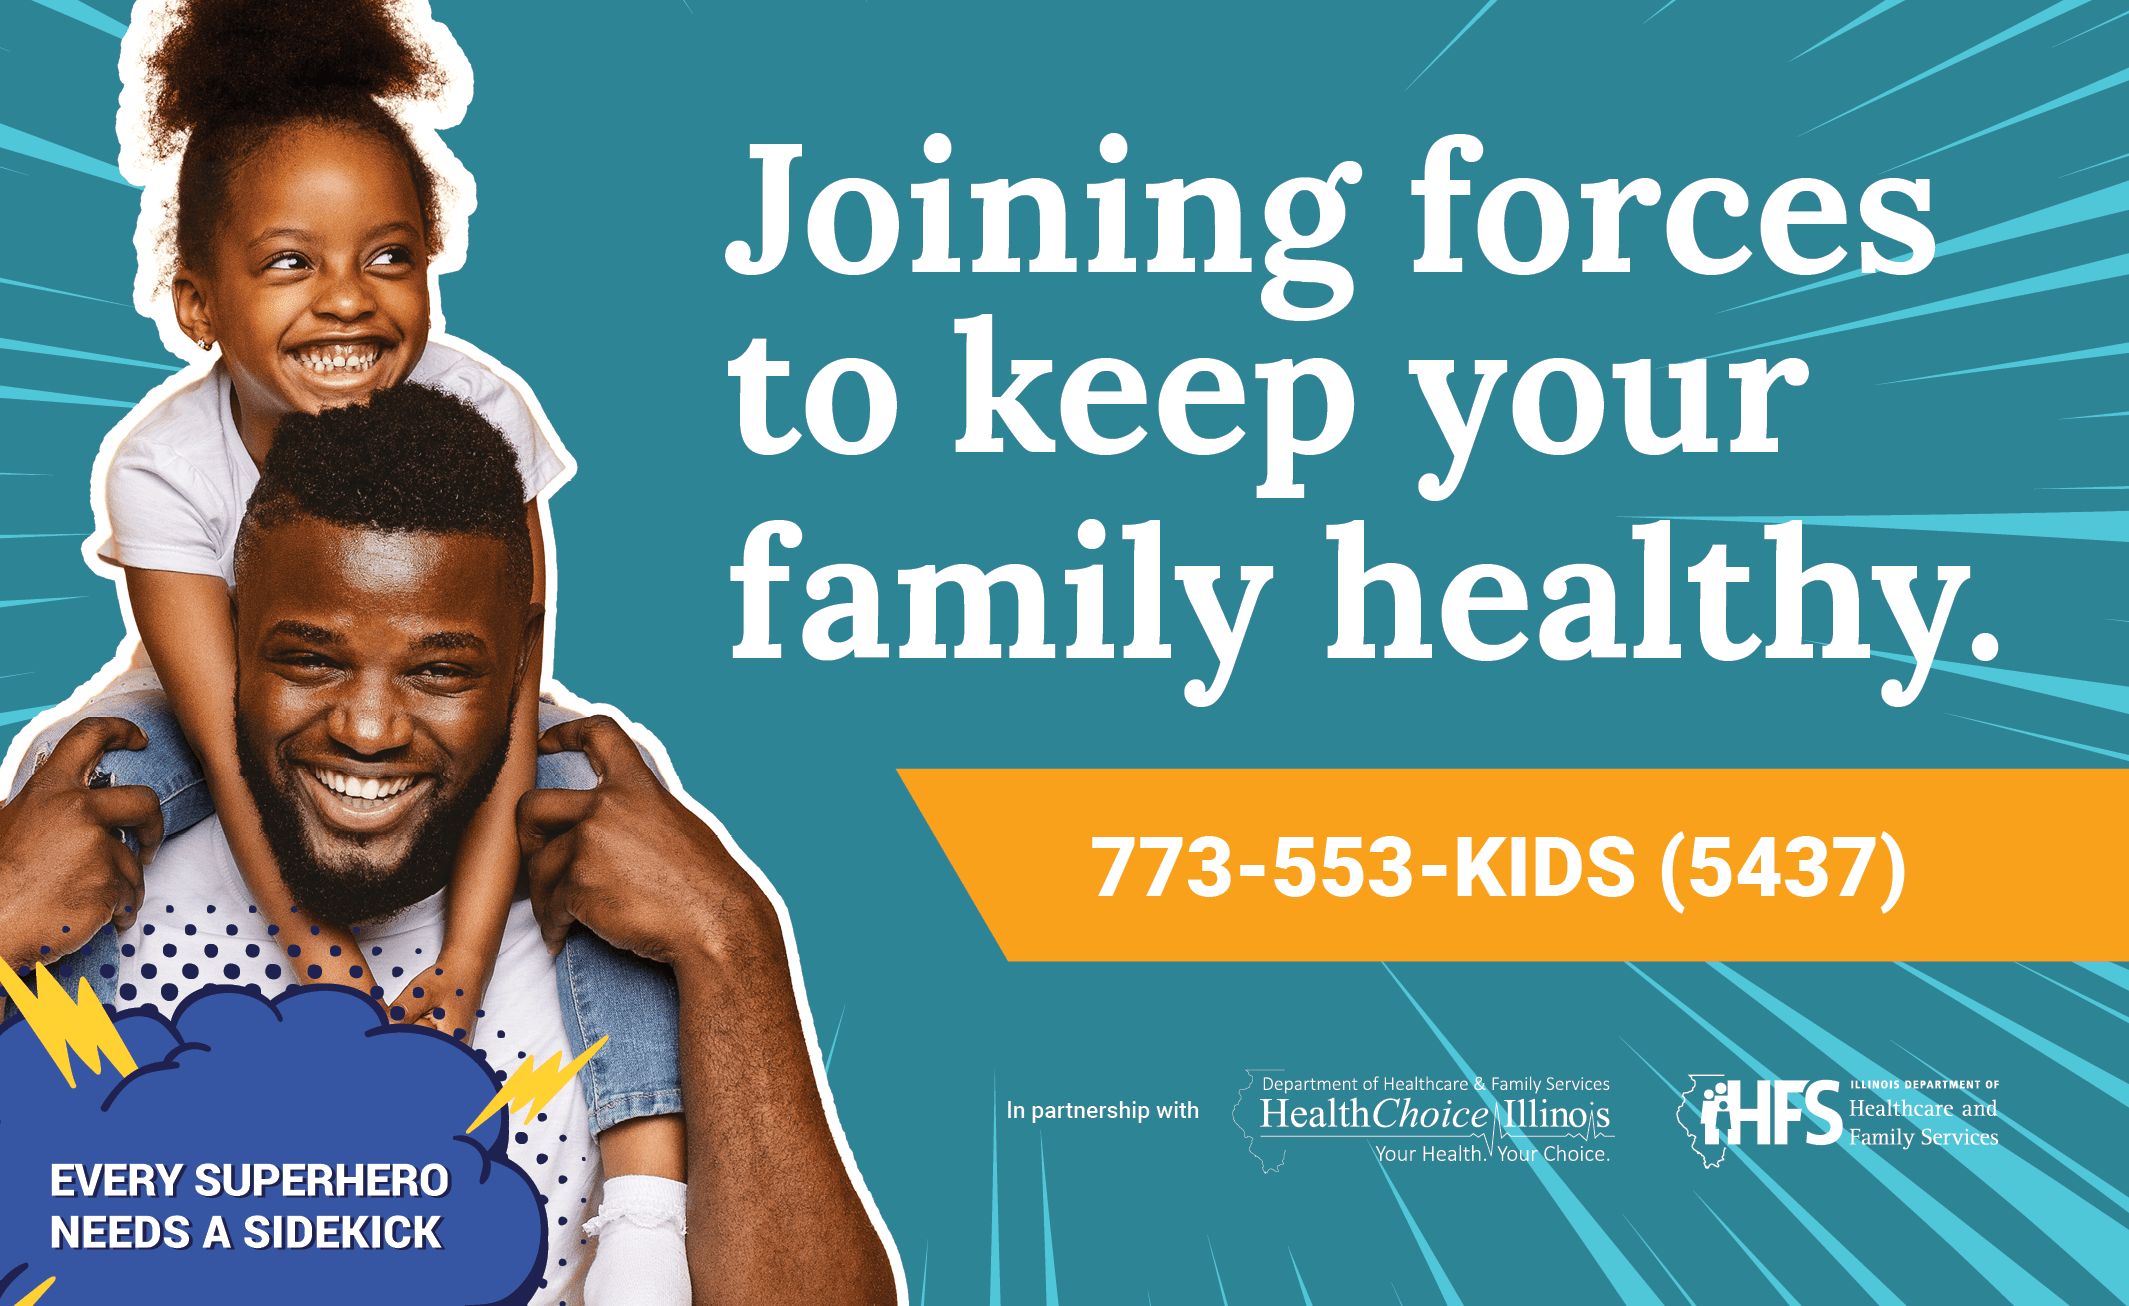 Request SNAP and Medicaid assistance at 773-553-KIDS